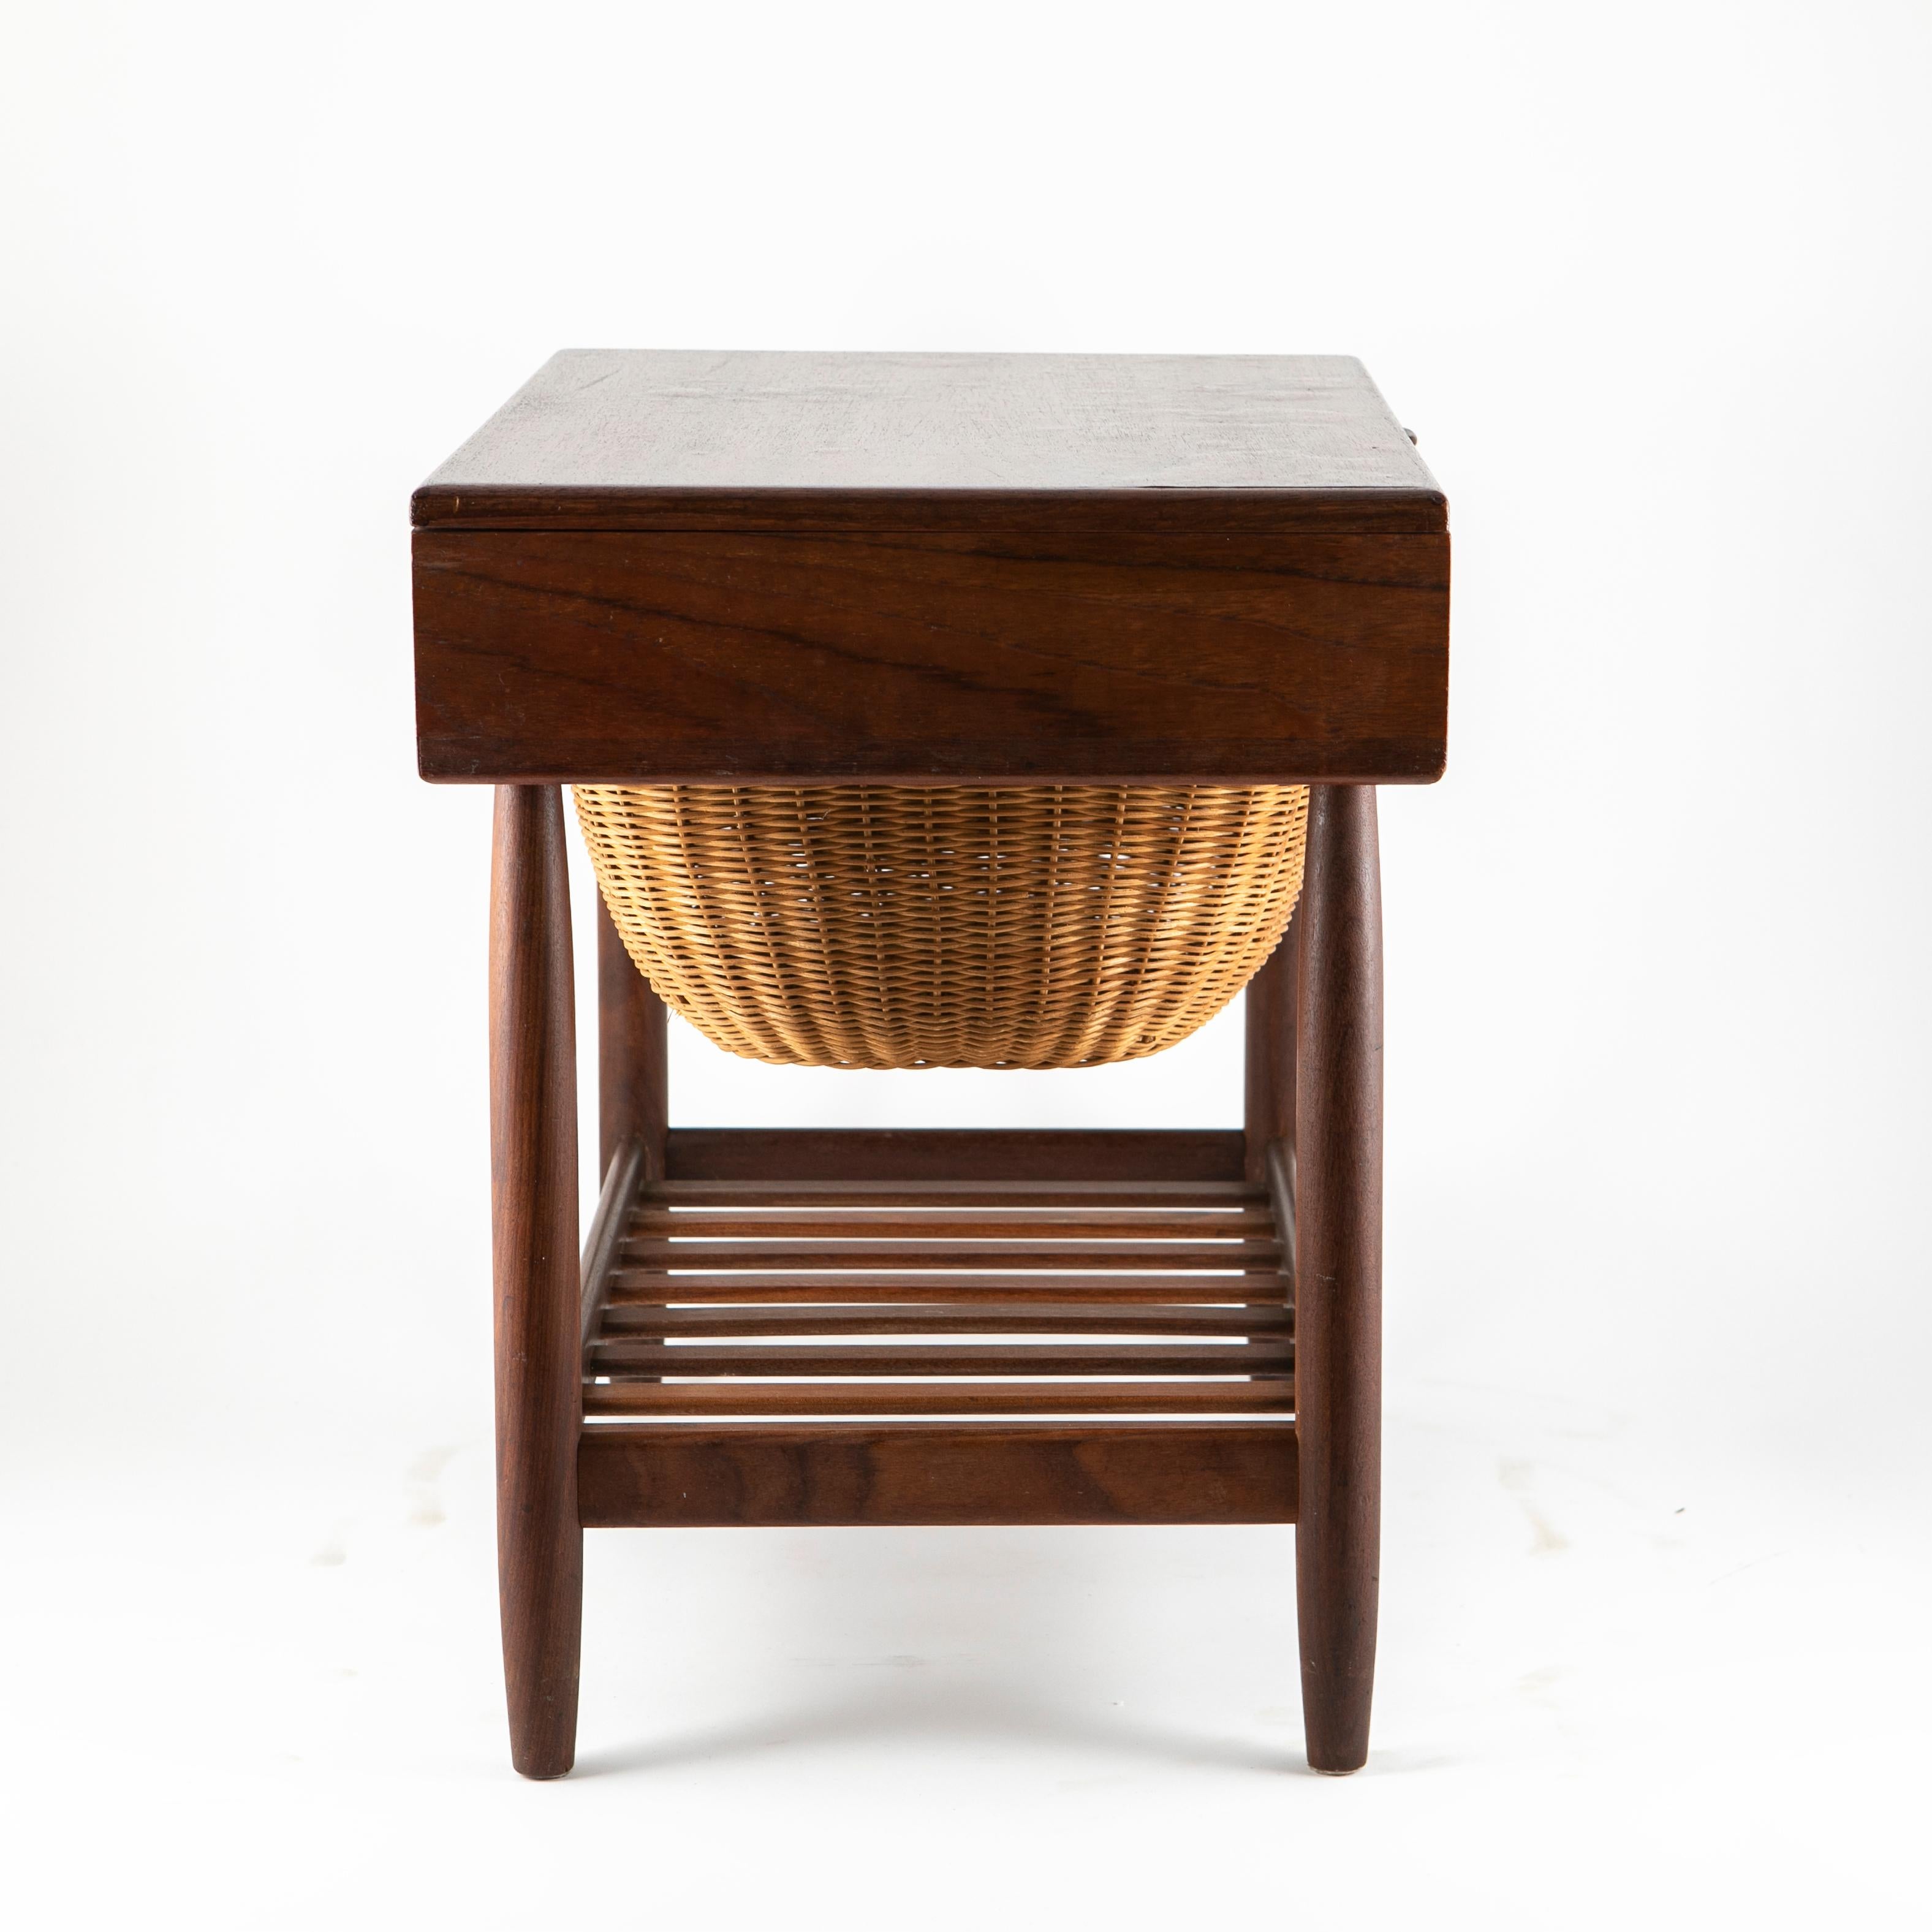 20th Century Danish Modern Sewing / End Table by Ejvind Johansson for FDB Mobler